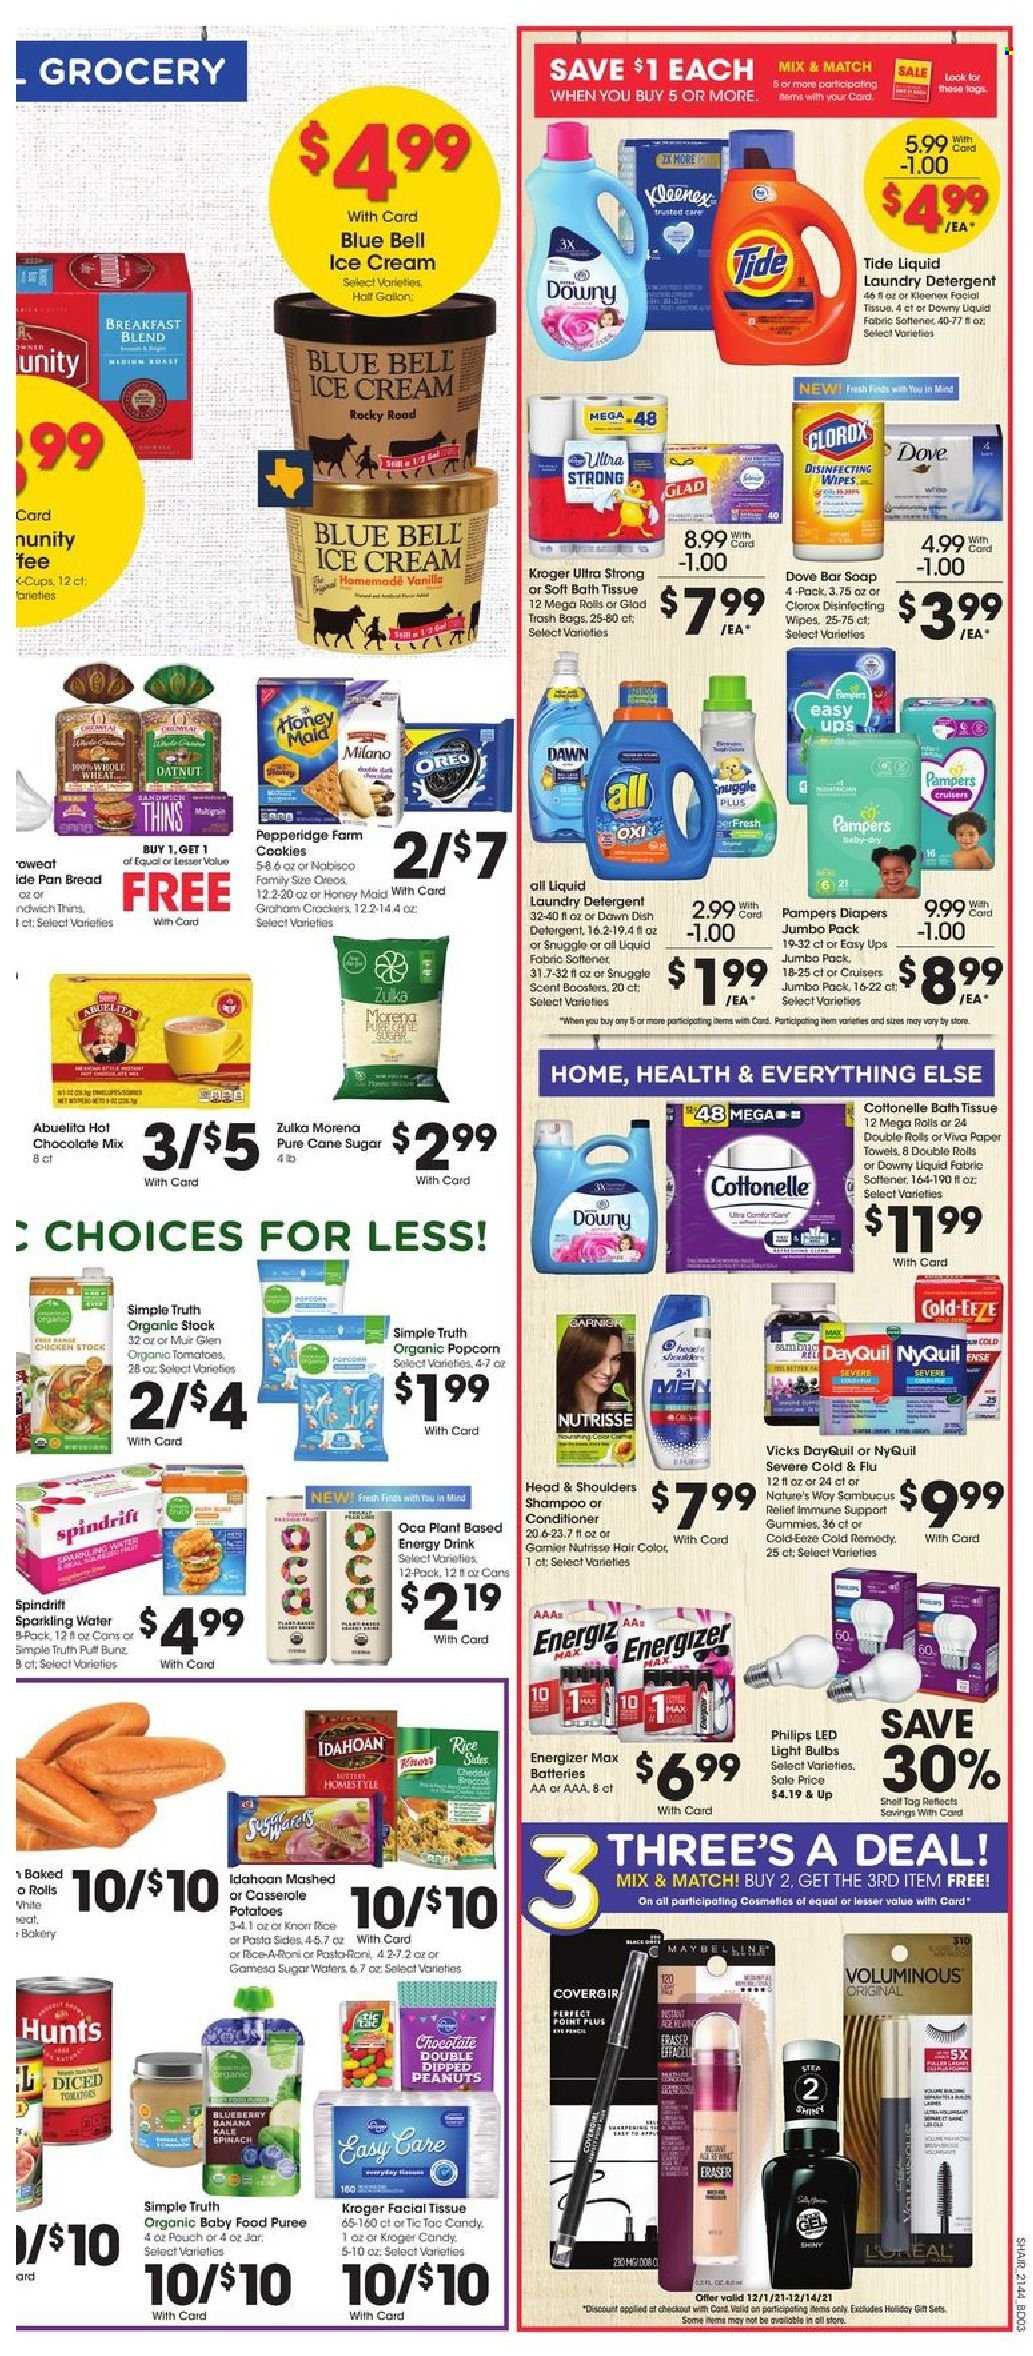 thumbnail - Kroger Flyer - 12/01/2021 - 12/07/2021 - Sales products - Philips, bread, Ace, spinach, kale, Knorr, cheddar, cheese, Oreo, ice cream, Blue Bell, cookies, Tic Tac, Thins, popcorn, cane sugar, sugar, Honey Maid, rice, peanuts, energy drink, Spindrift, sparkling water, breakfast blend, organic baby food, wipes, Pampers, nappies, Dove, bath tissue, Cottonelle, Kleenex, kitchen towels, paper towels, detergent, Clorox, Snuggle, Tide, fabric softener, laundry detergent, Downy Laundry, shampoo, soap bar, soap, L’Oréal, conditioner, Head & Shoulders, Vicks, trash bags, Maybelline, pan, casserole, cup, jar, eraser, battery, bulb, Energizer, light bulb, LED light, DayQuil, Cold & Flu, NyQuil, Cold-EEZE. Page 7.